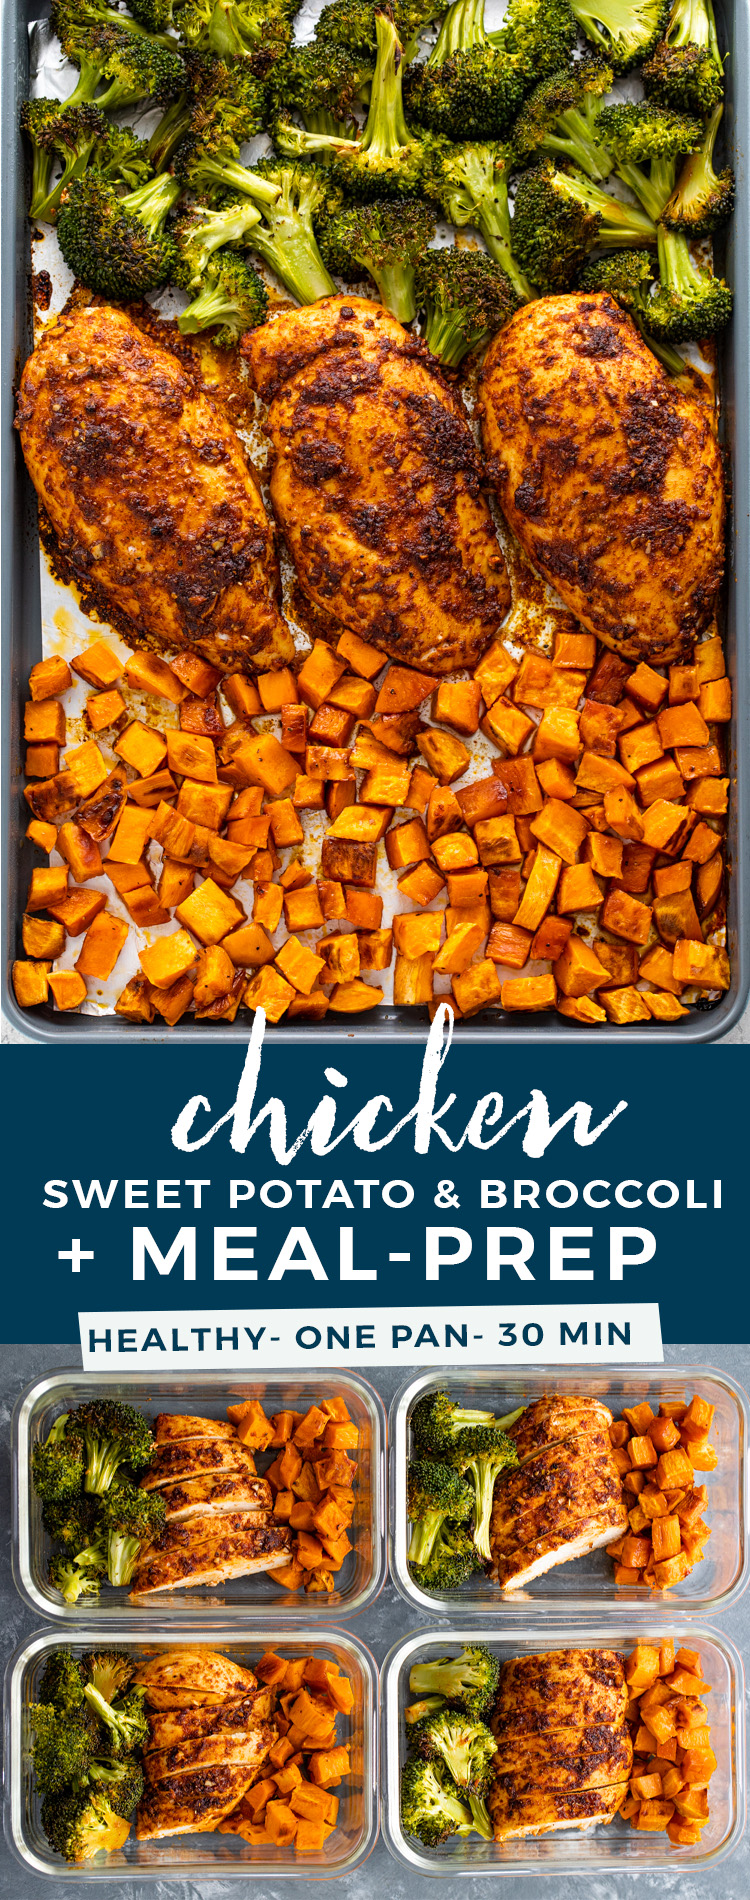 Sheet Pan Roasted Chicken, Sweet Potatoes, & Broccoli + Meal Prep -   18 meal prep recipes for the week ideas